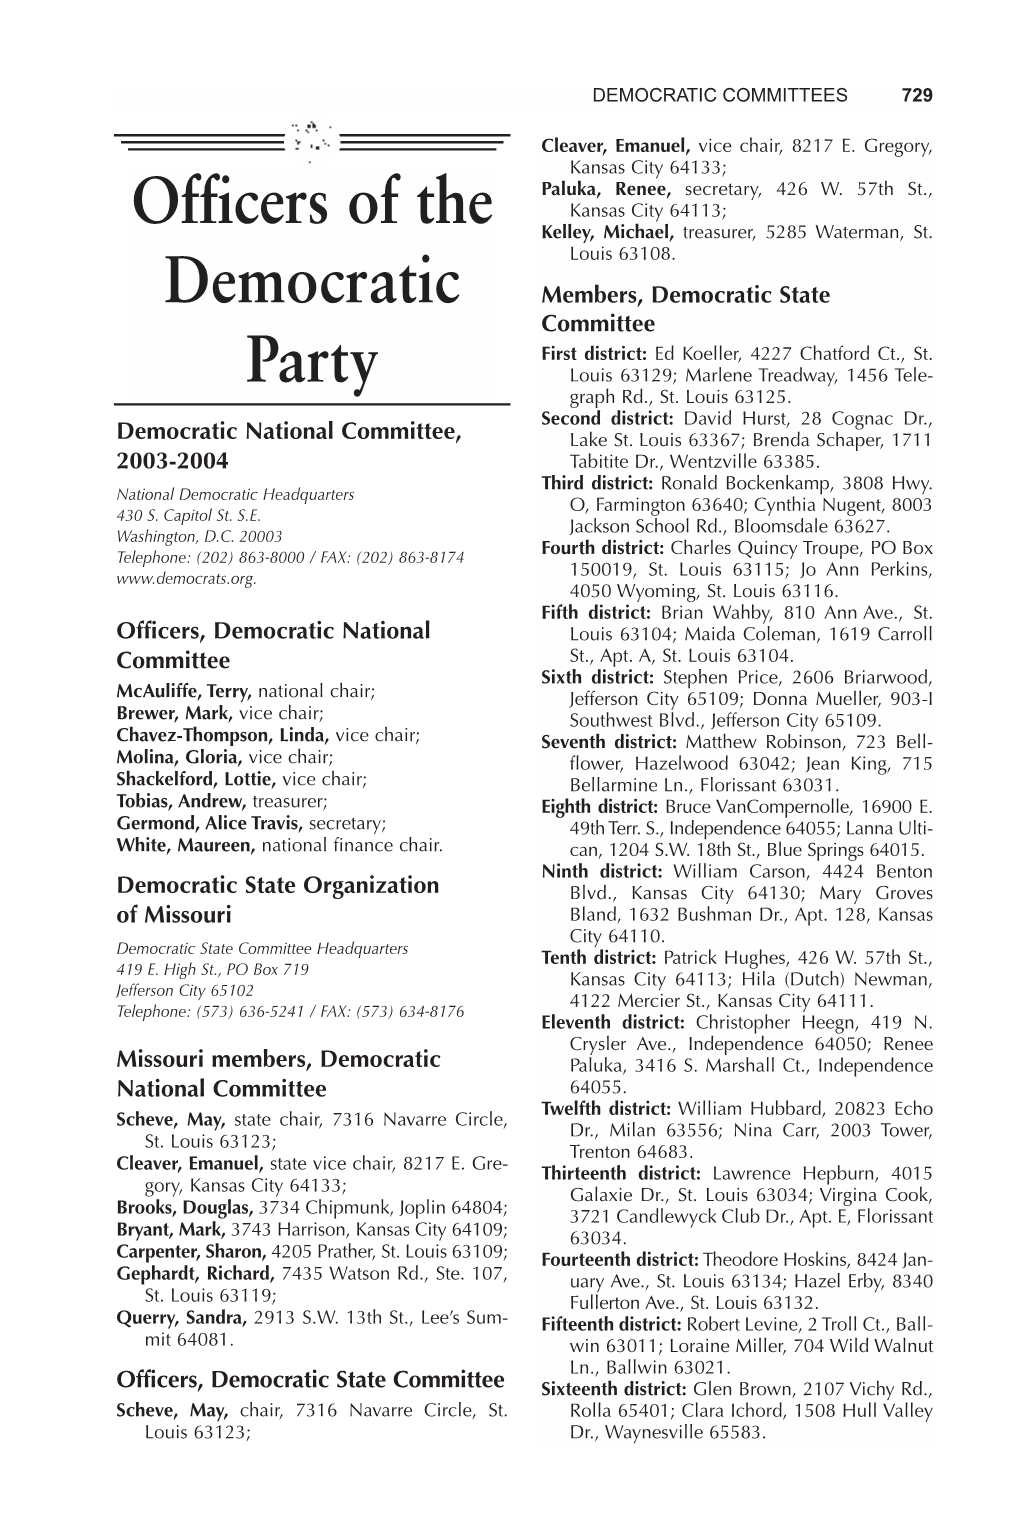 Officers of the Democratic Party